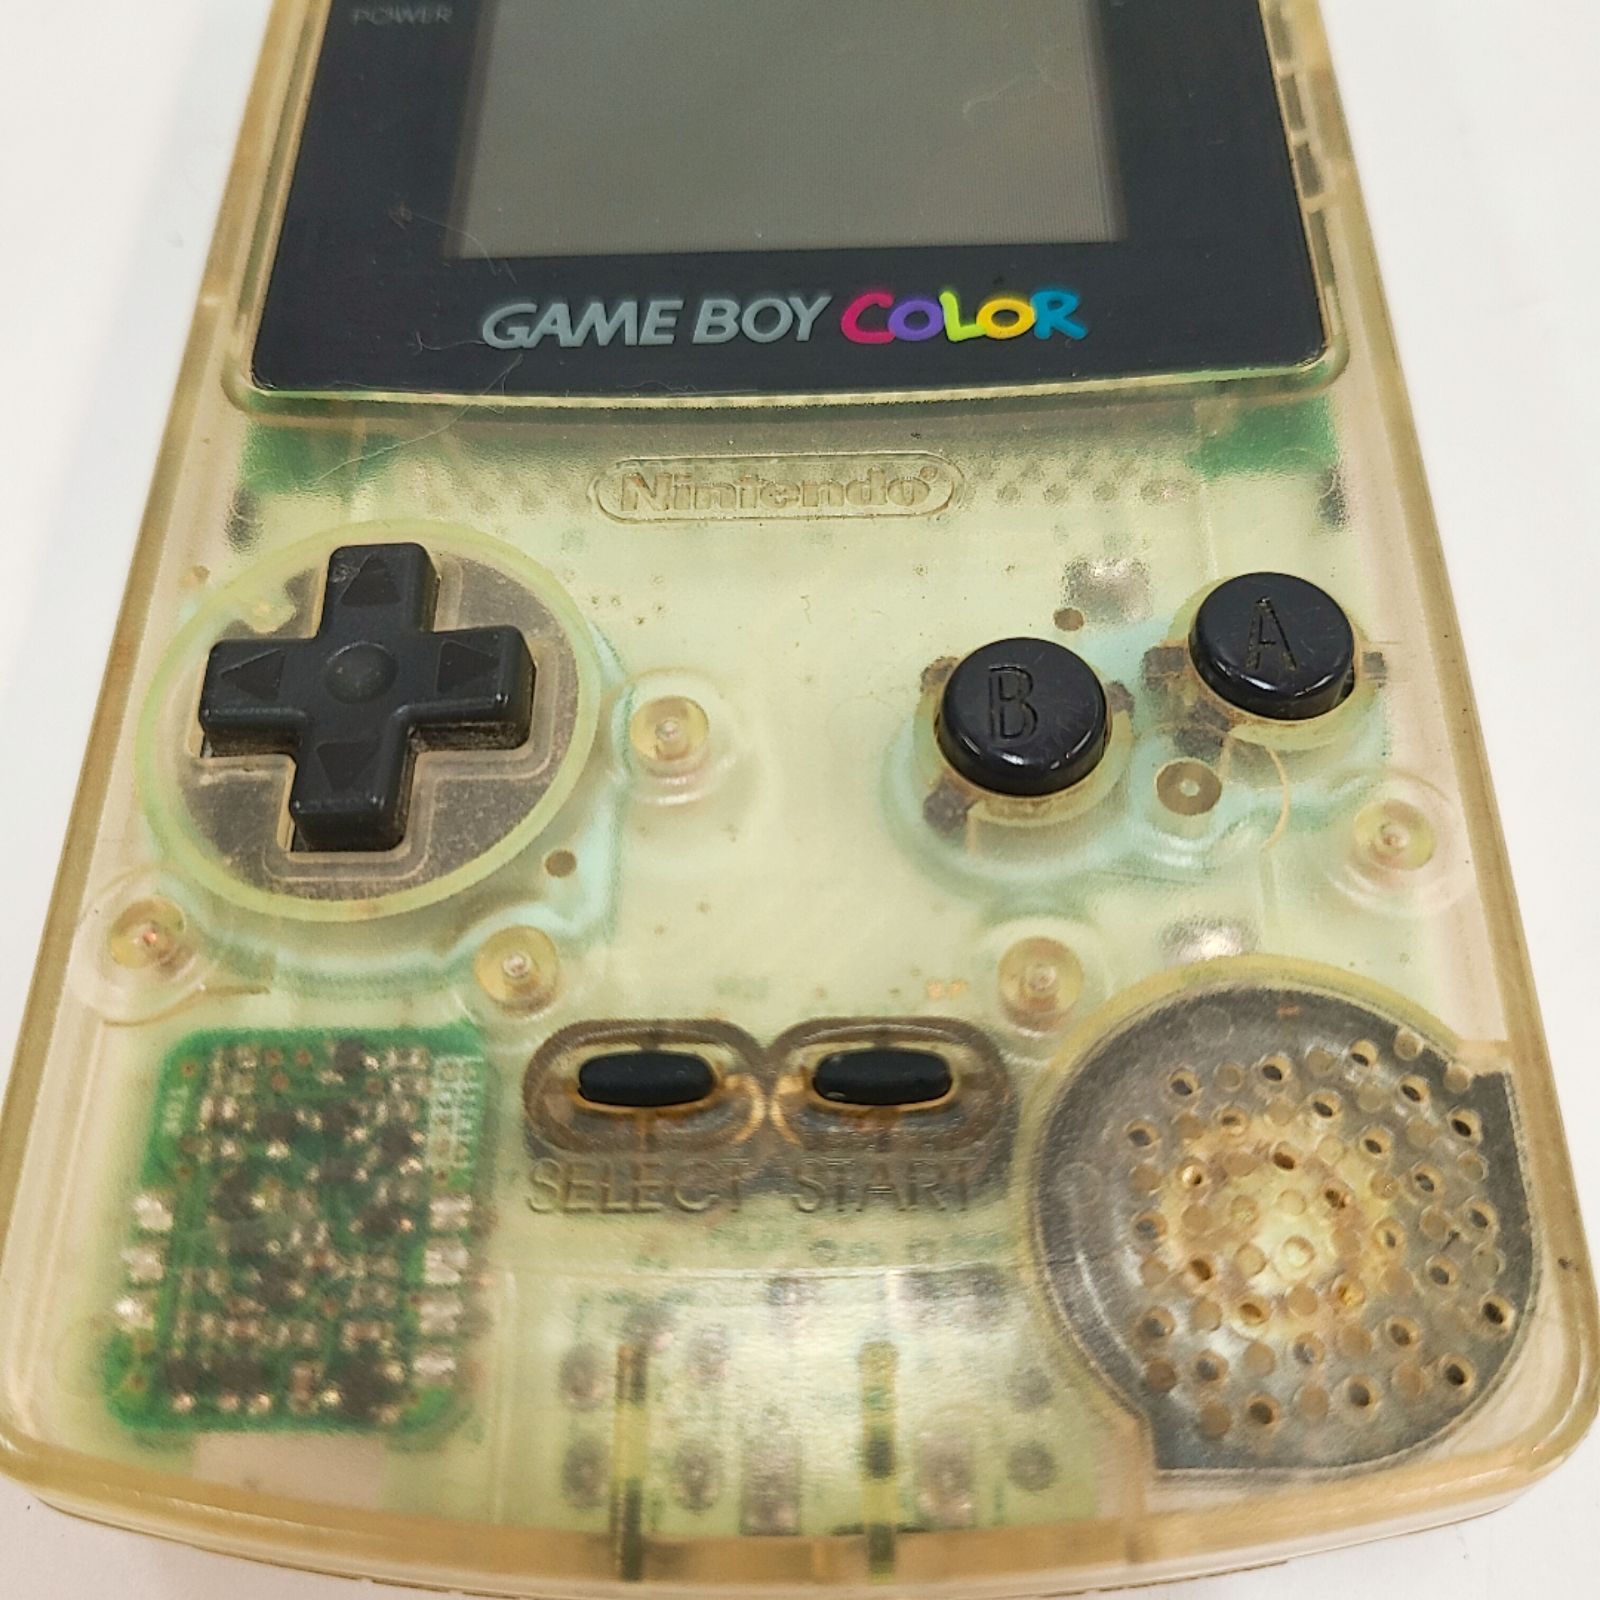 GAMEBOY COLOR ゲームボーイ カラー 本体 クリア ジャンク - ゲーム